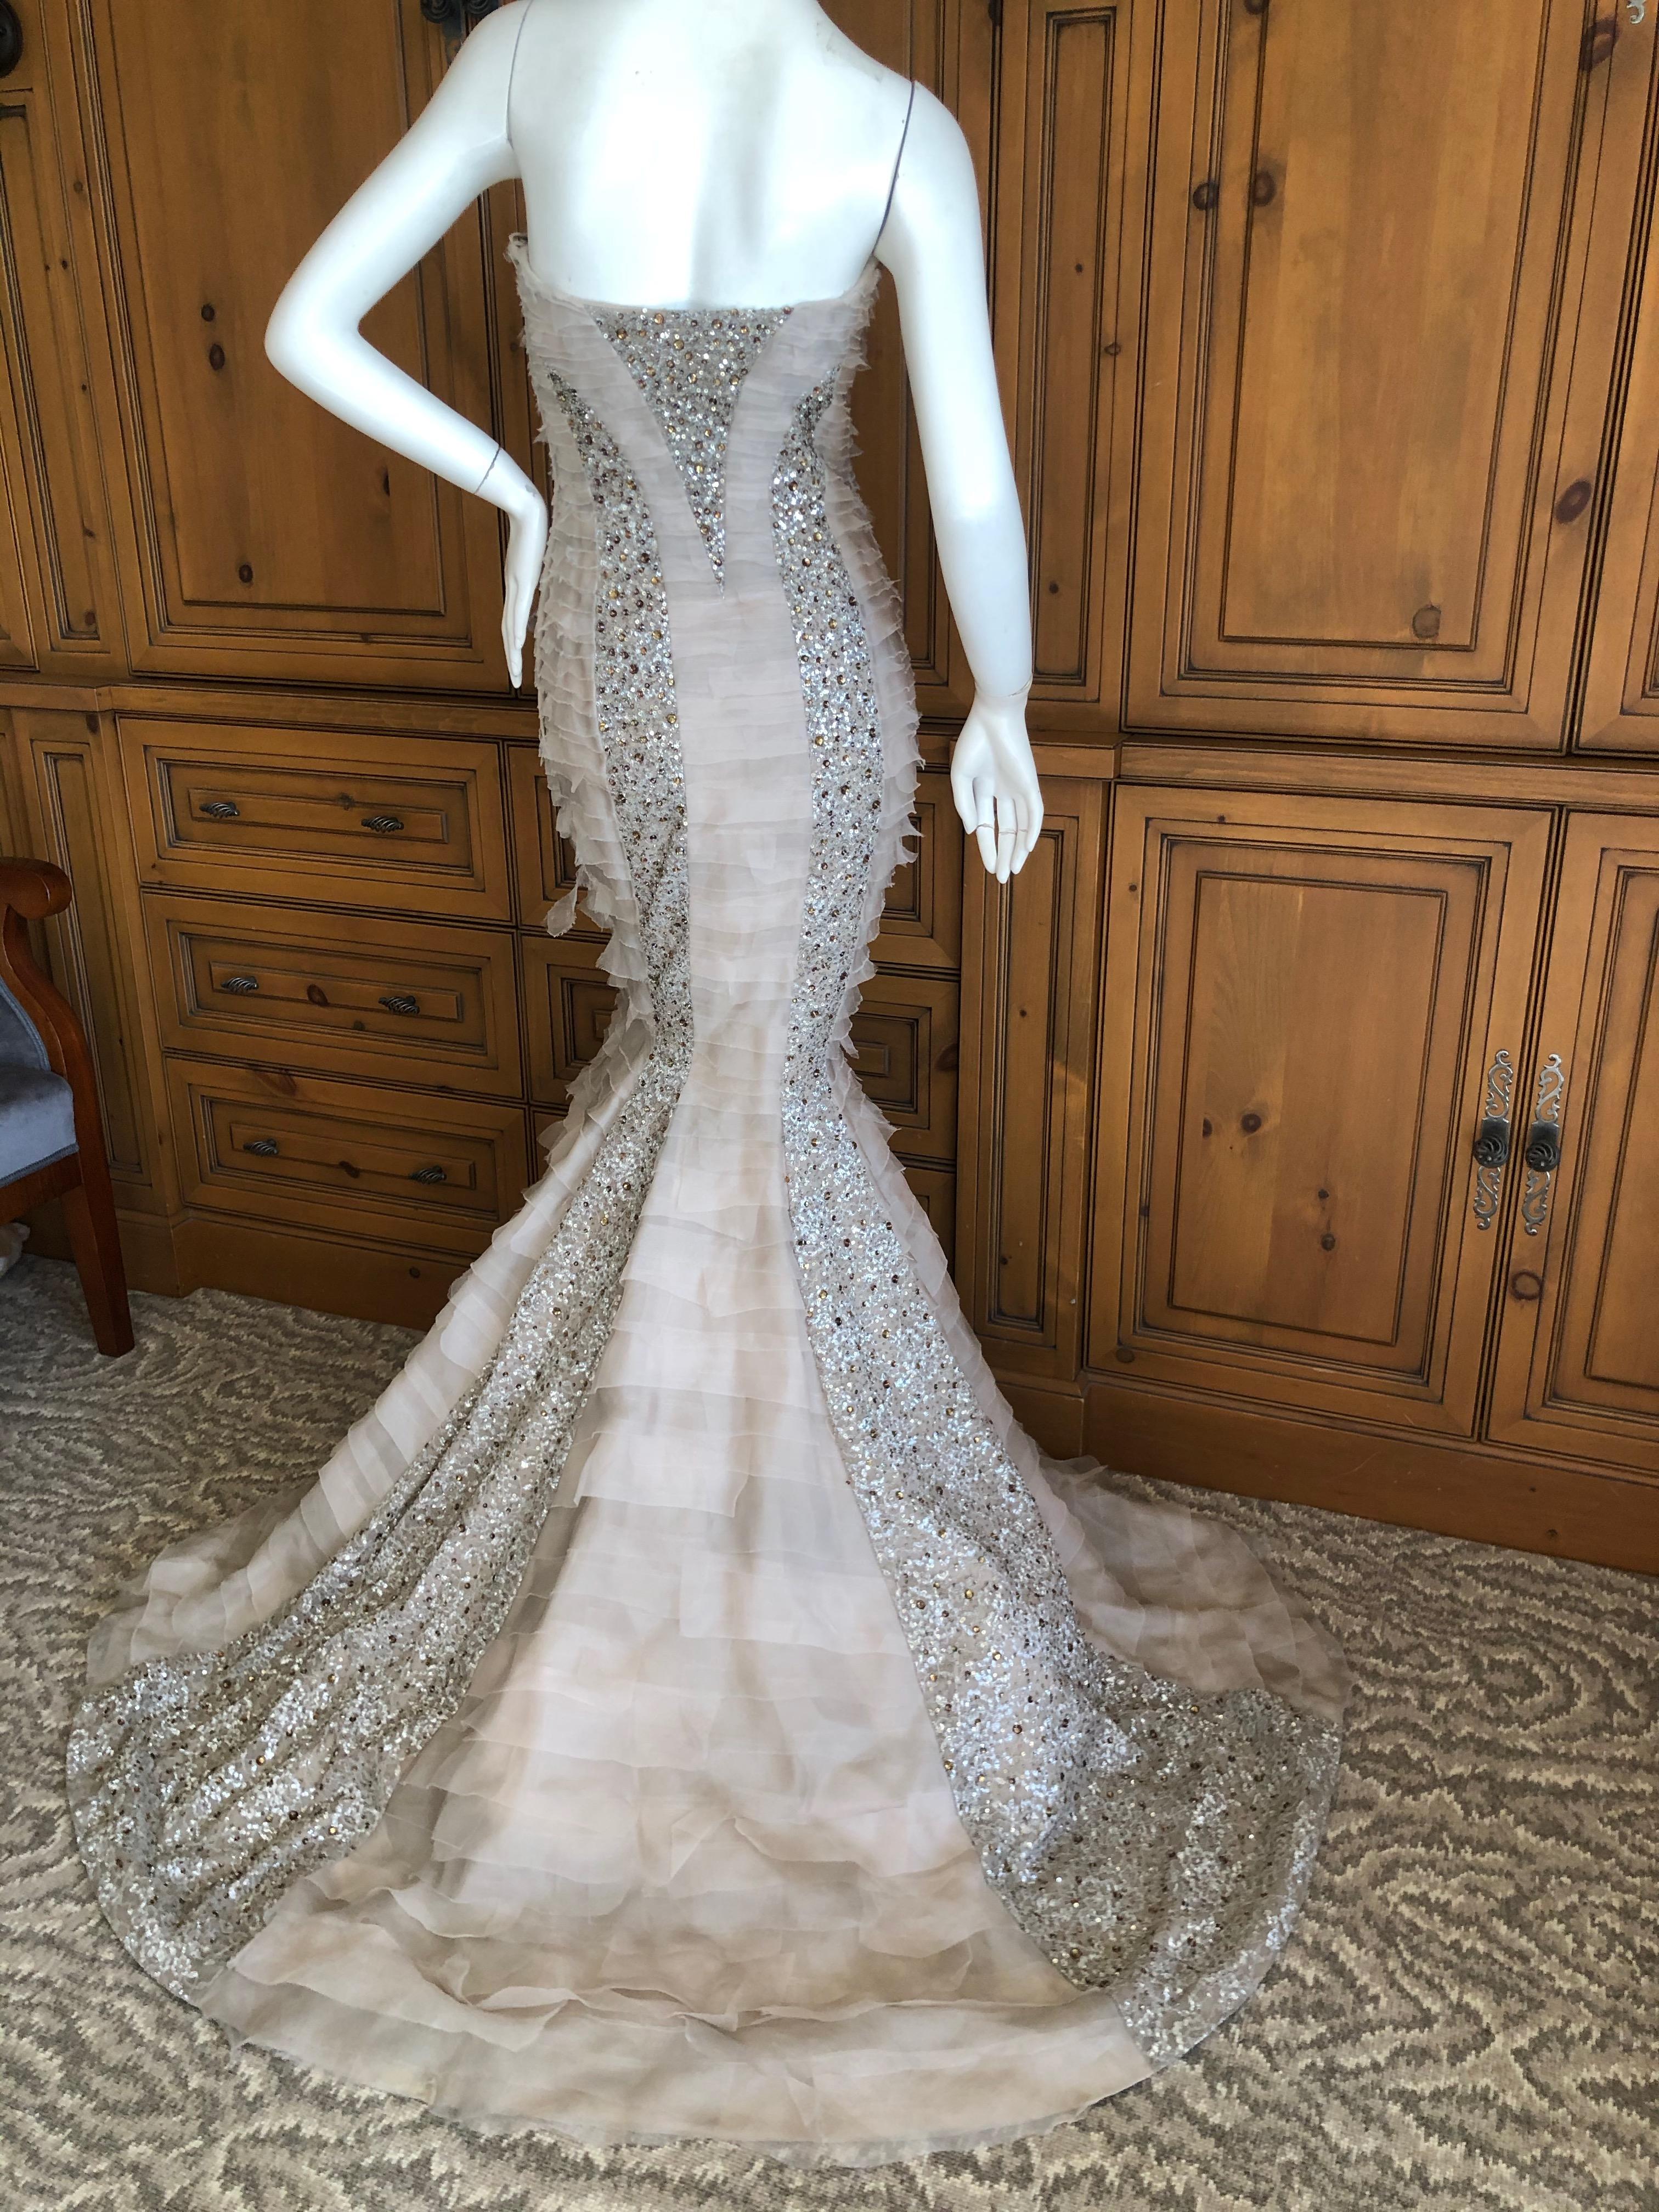 Oscar de la Renta Raw Edge Embellished Layered Mermaid Dress with Inner Boned Corset
Simply Stunning. Please use the zoom feature to see all the remarkable details.
This is very tight in the thigh and knee area, a true mermaid dress.
Size 2, there